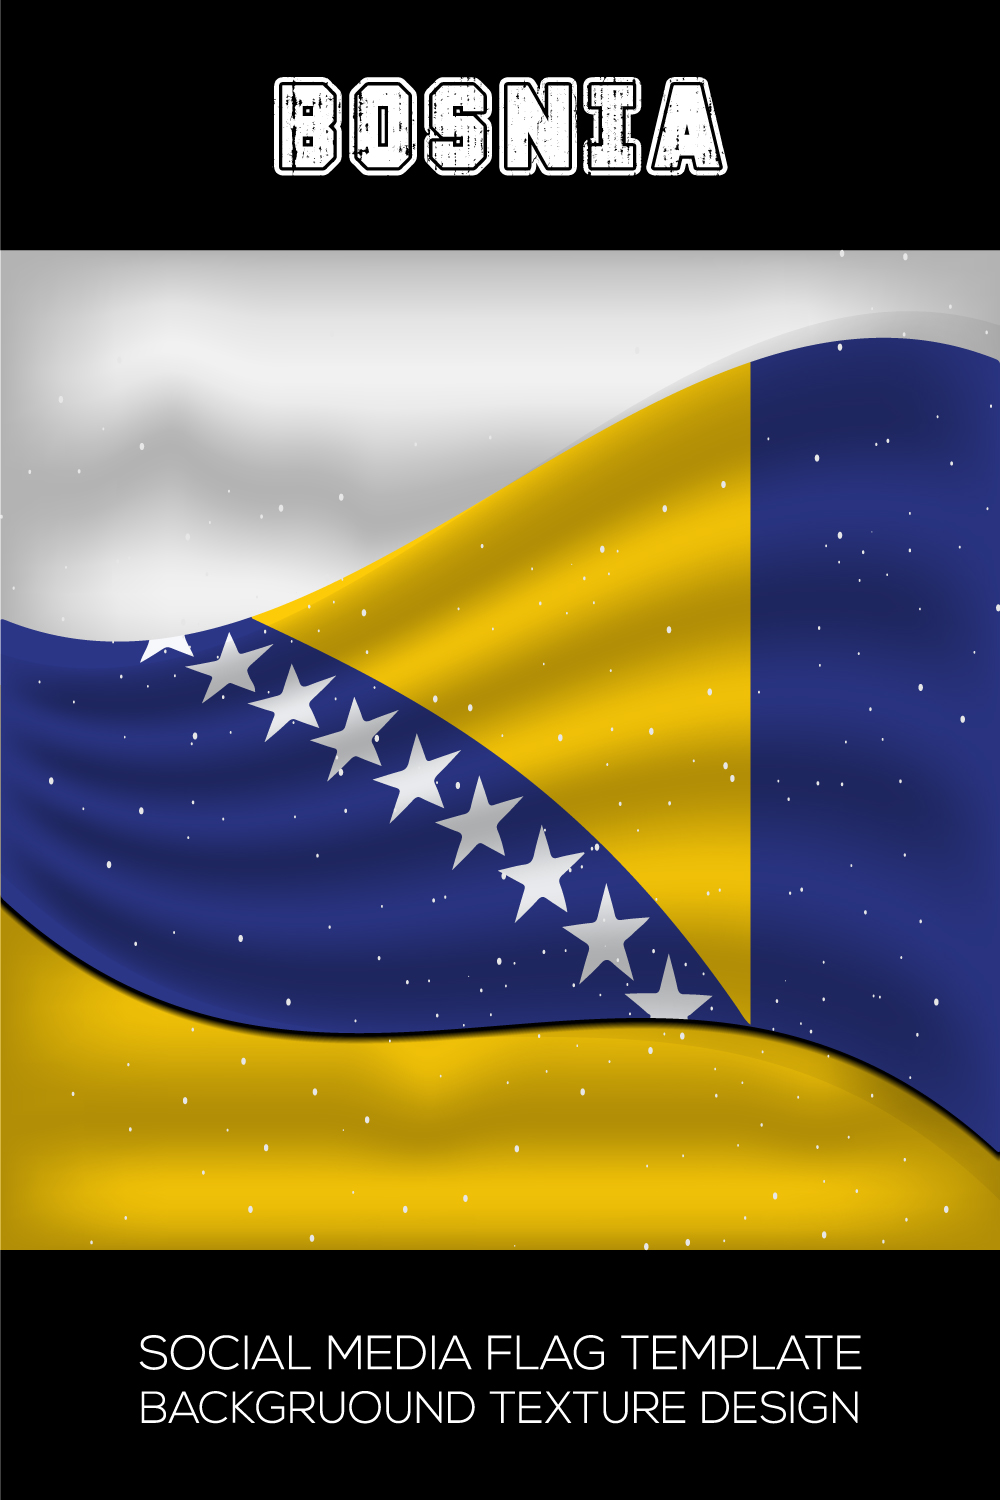 Irresistible image of the flag of Bosnia.